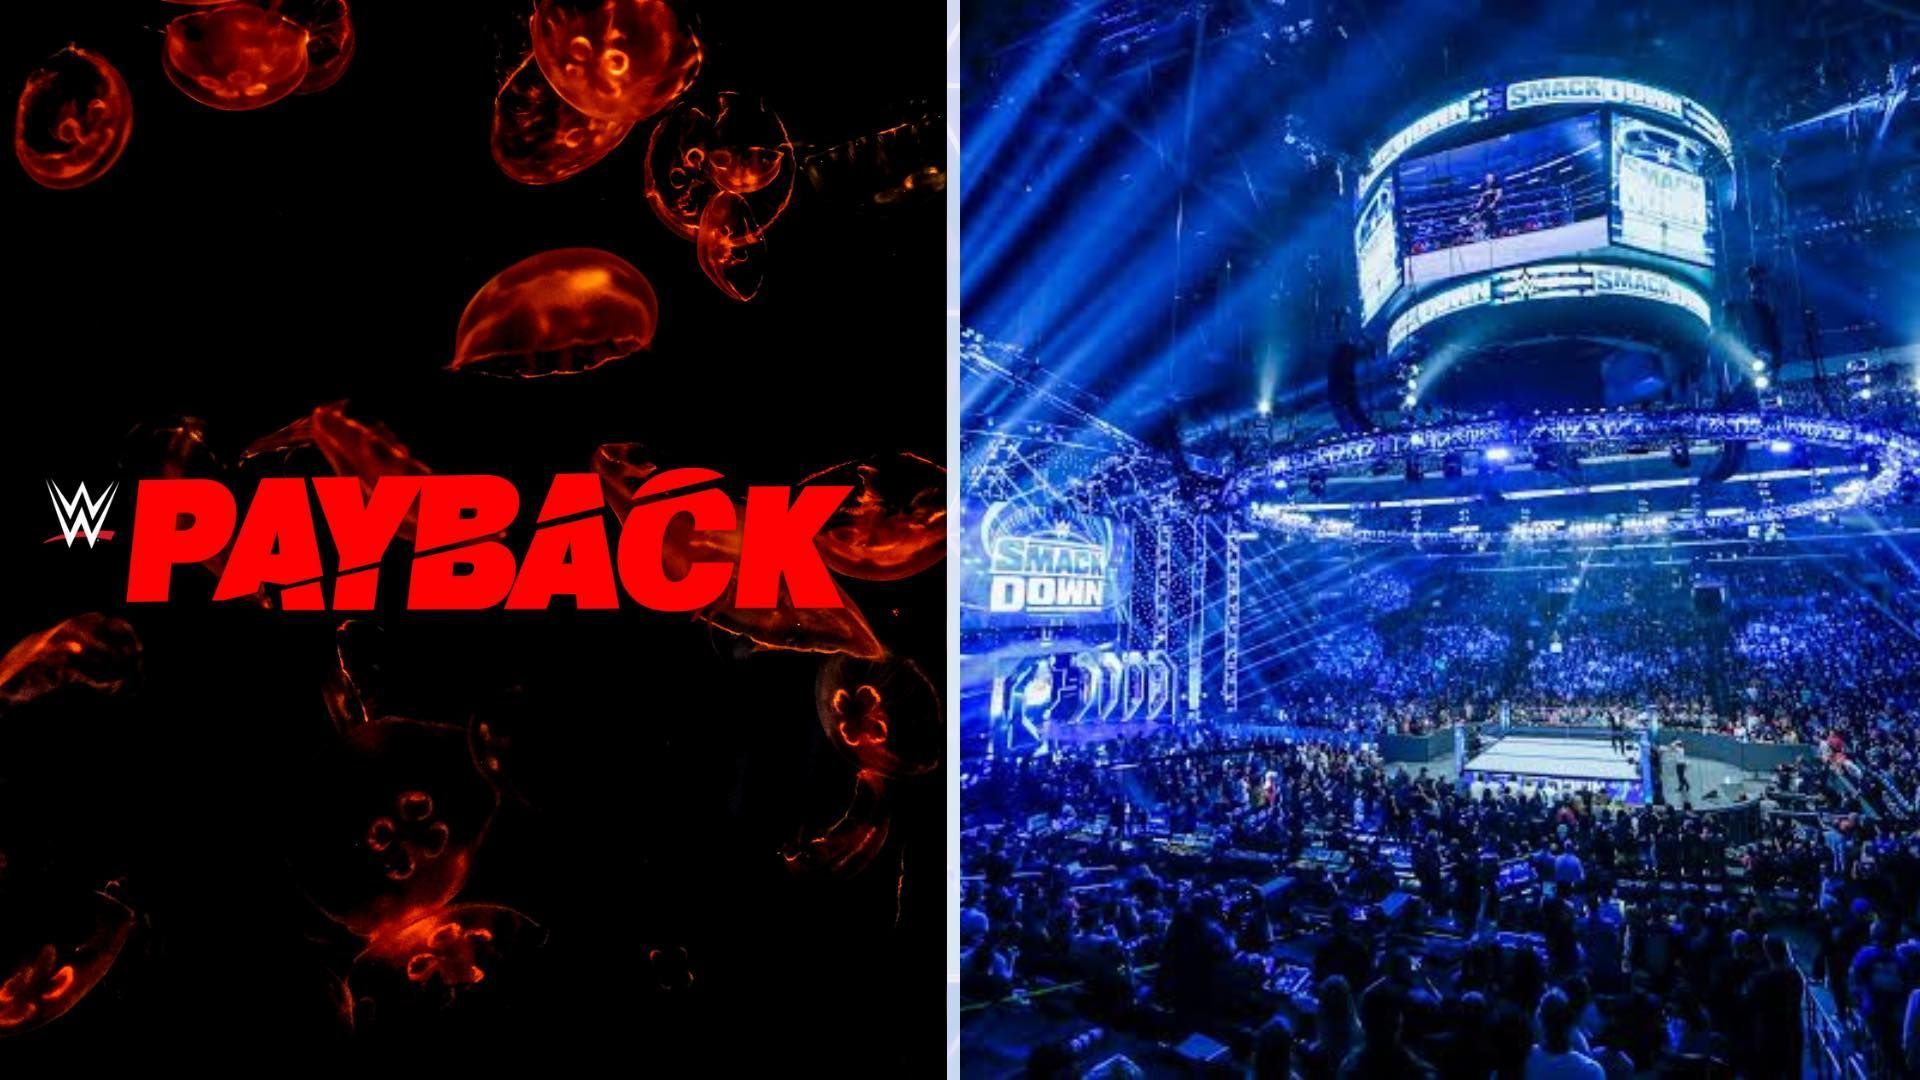 WWE Payback is set to take place on Sep 2, 2023